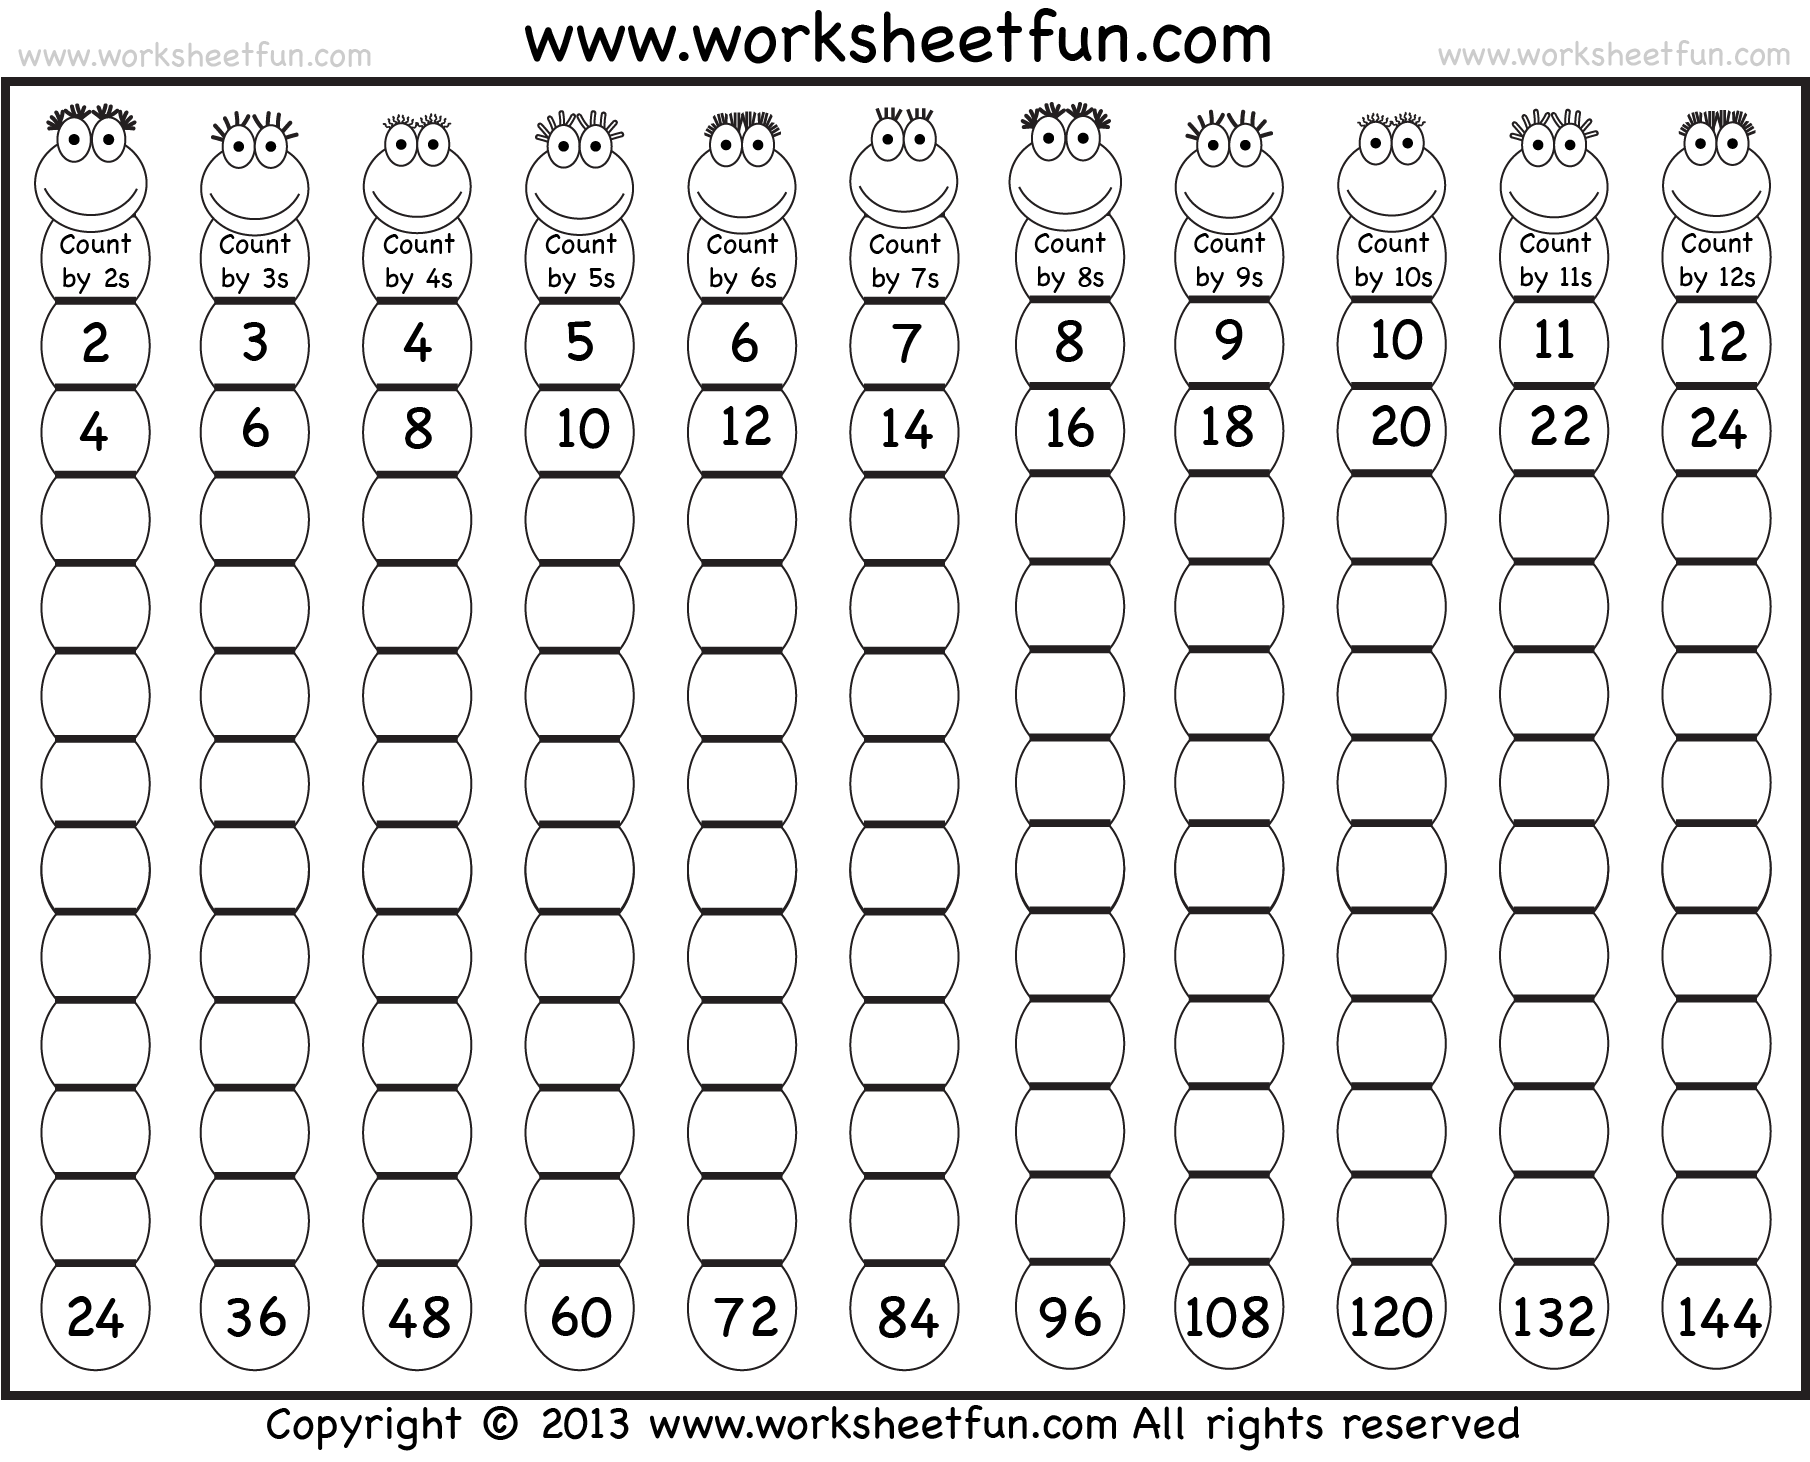 6-best-images-of-skip-counting-chart-printable-1-12-multiplication-times-table-charts-skip